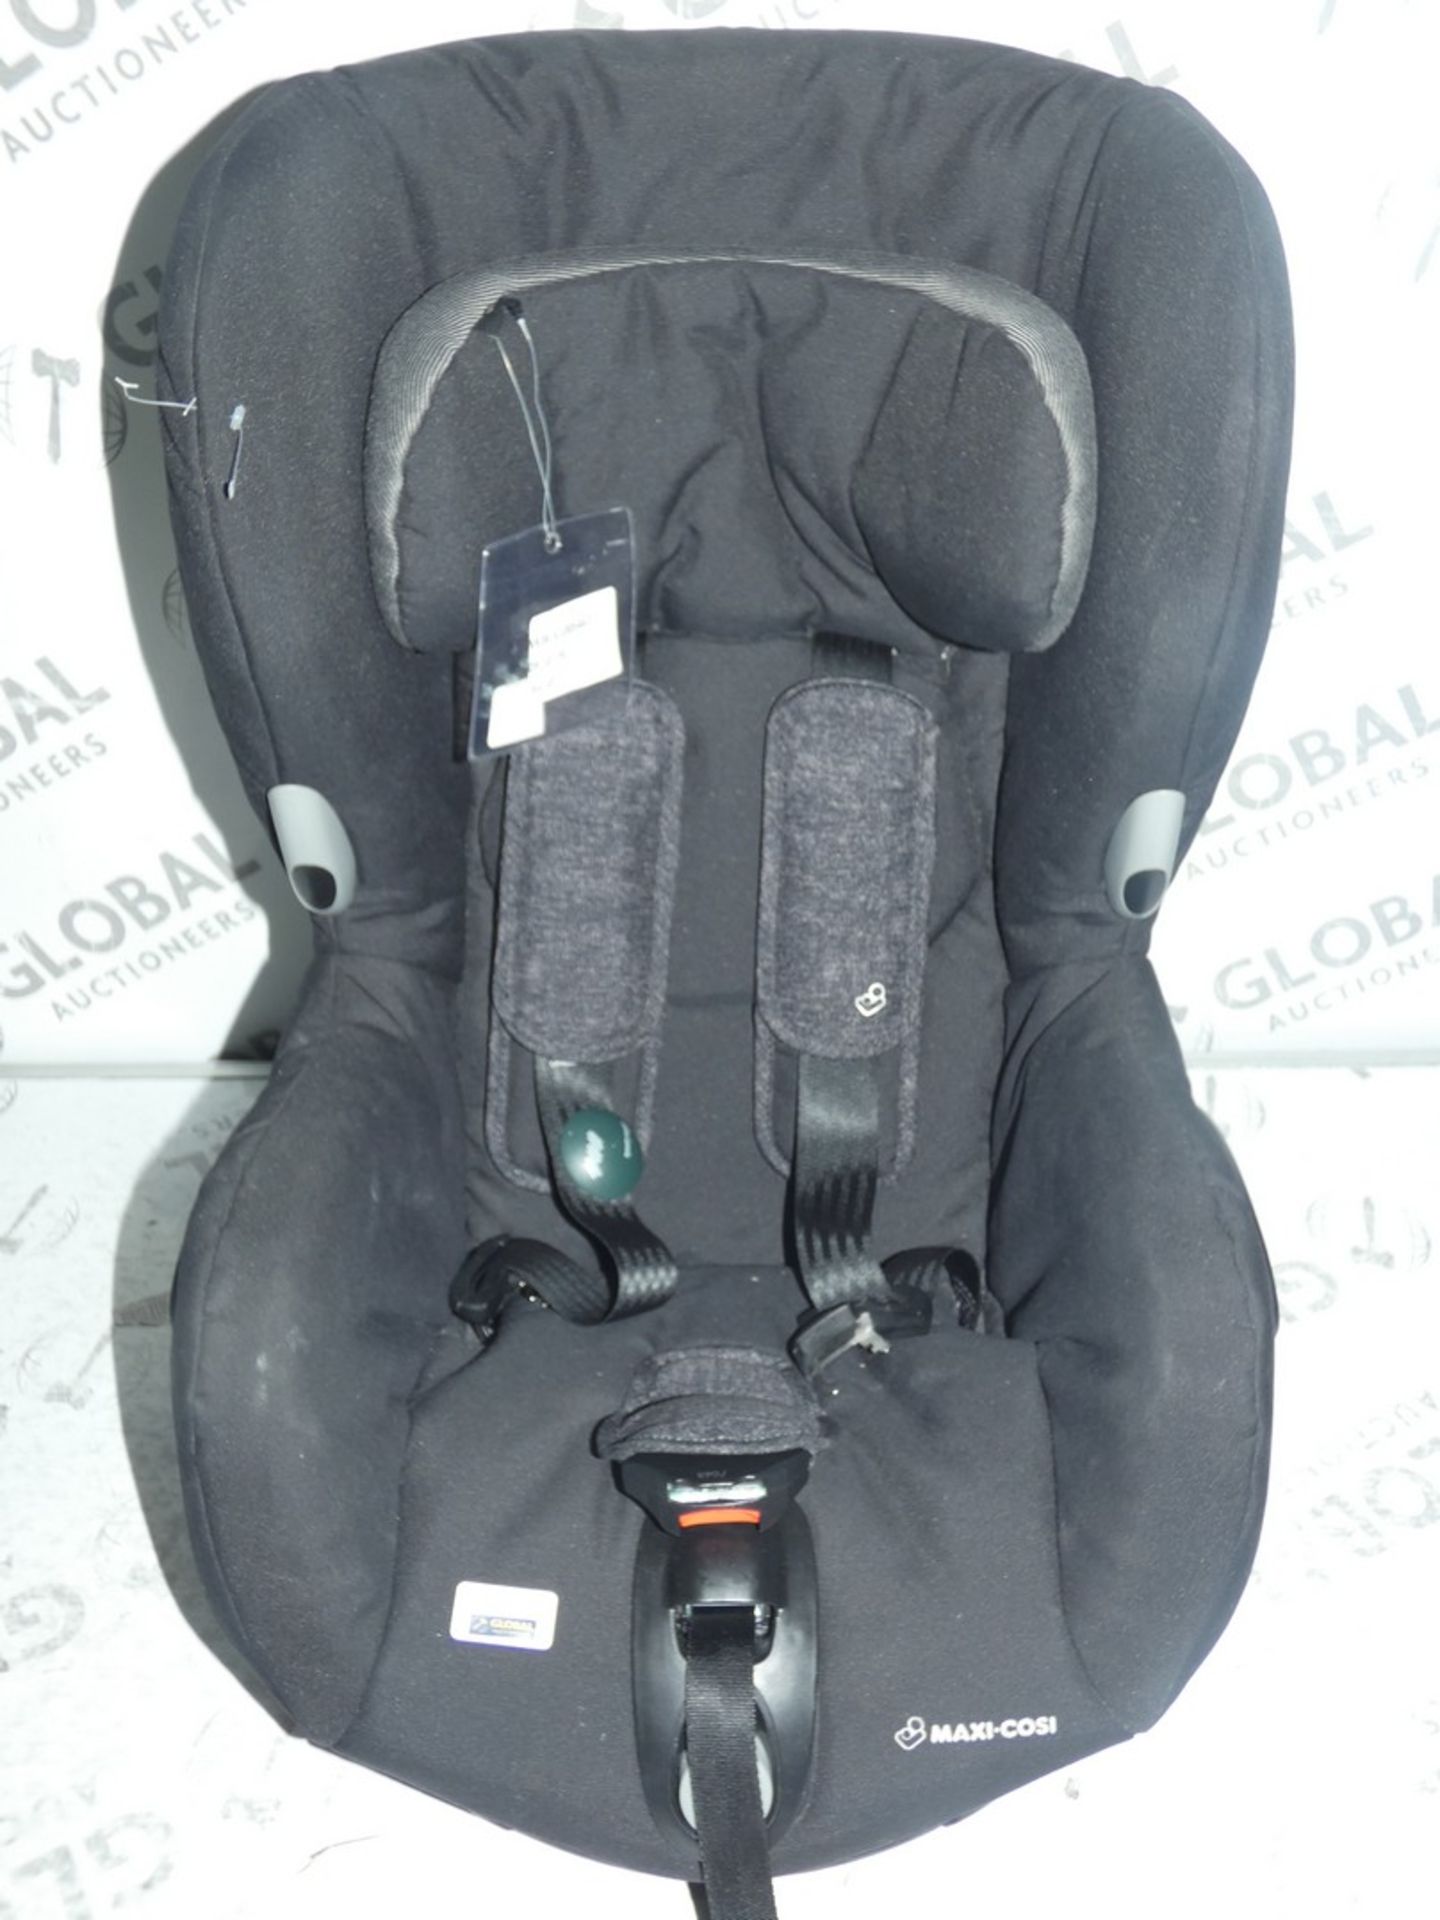 Maxi Cosi Axiss Children's Car Seat Base RRP £225 (RET00141266) (Public Viewing and Appraisals